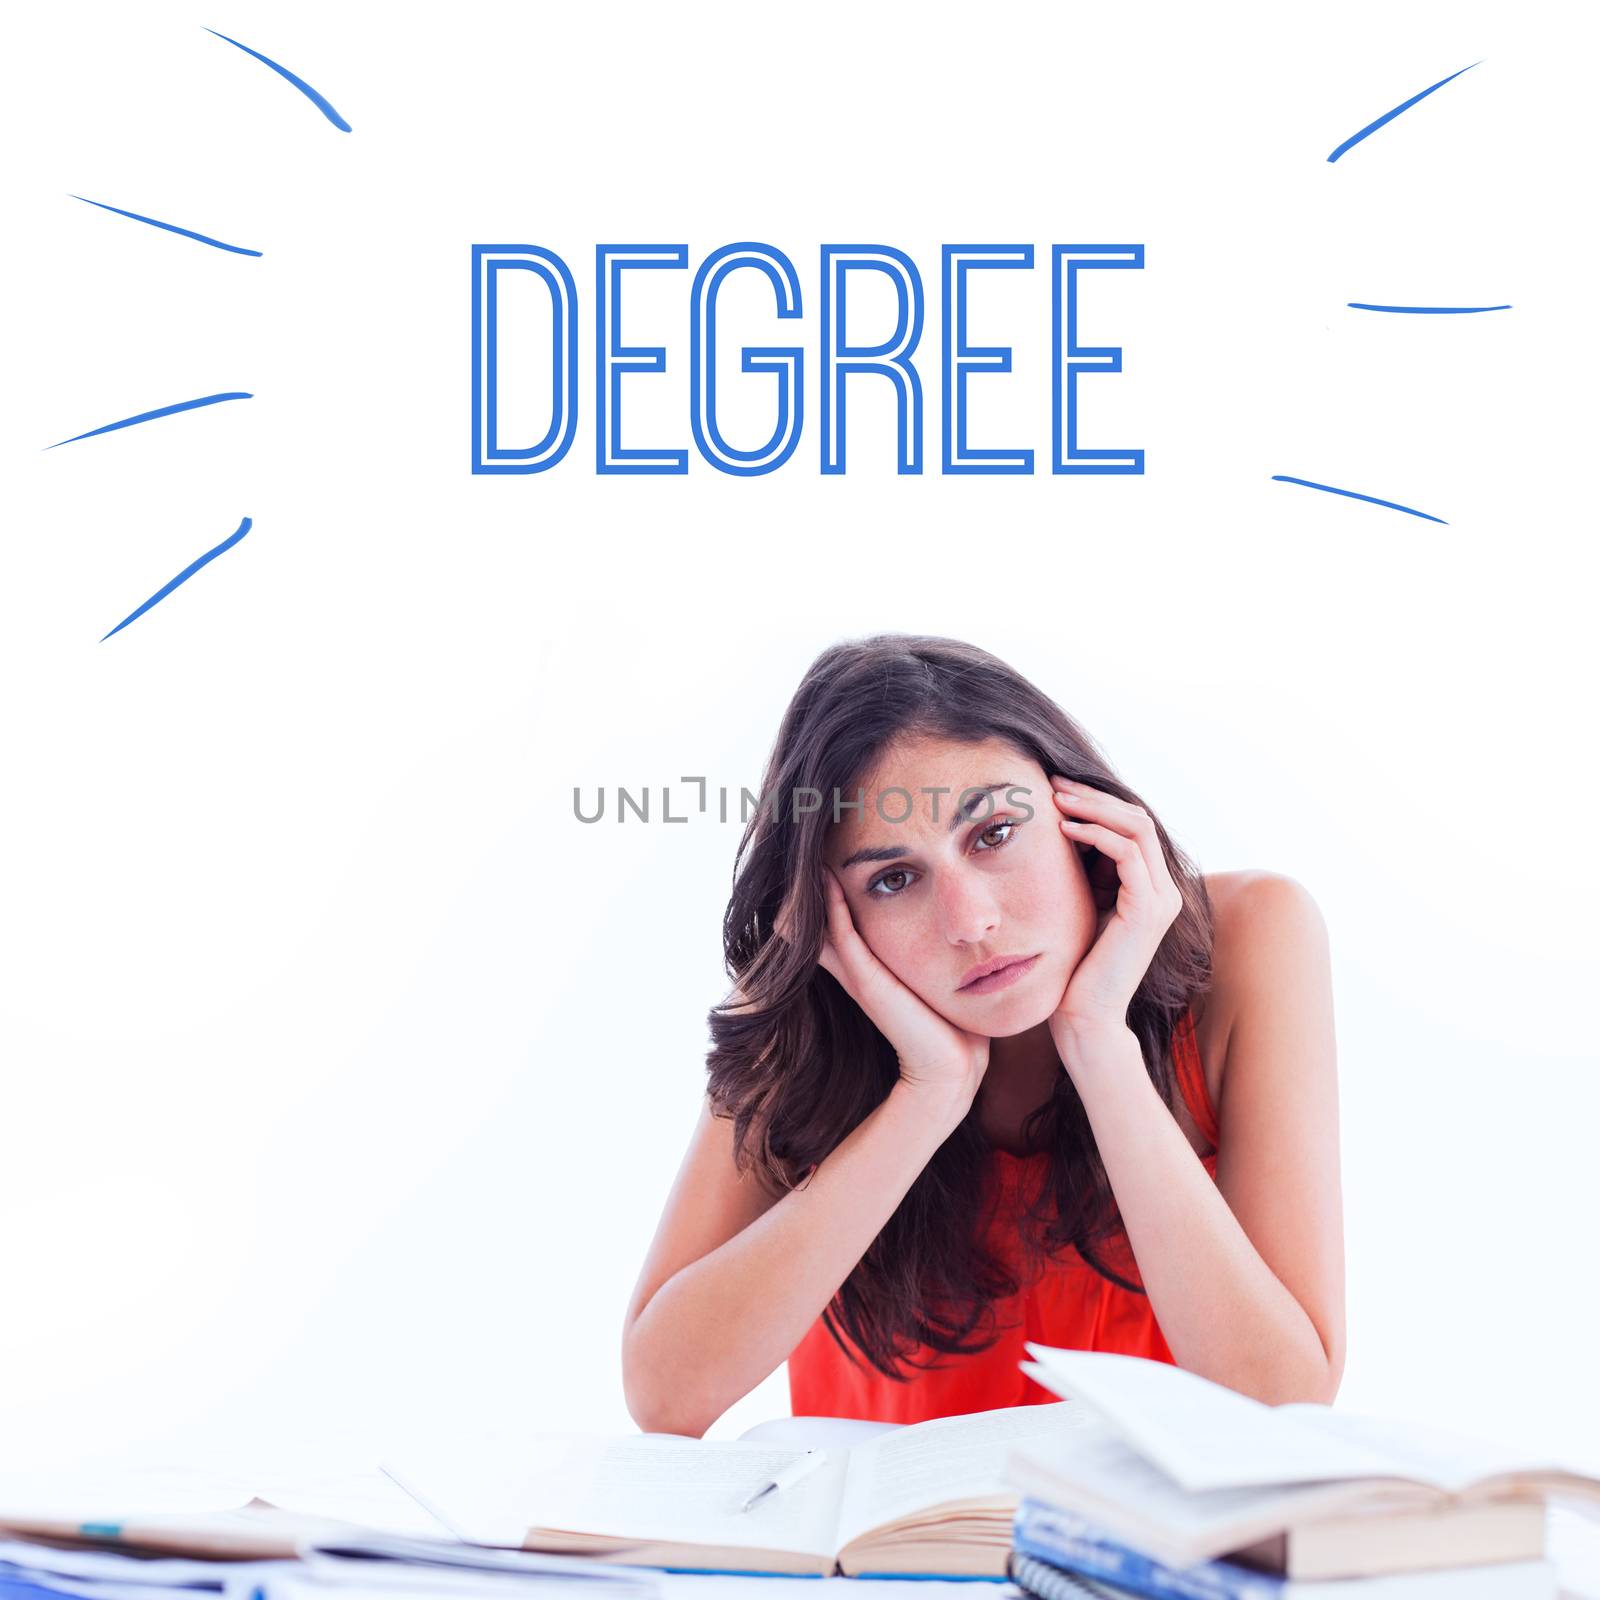 The word degree against stressed student at desk